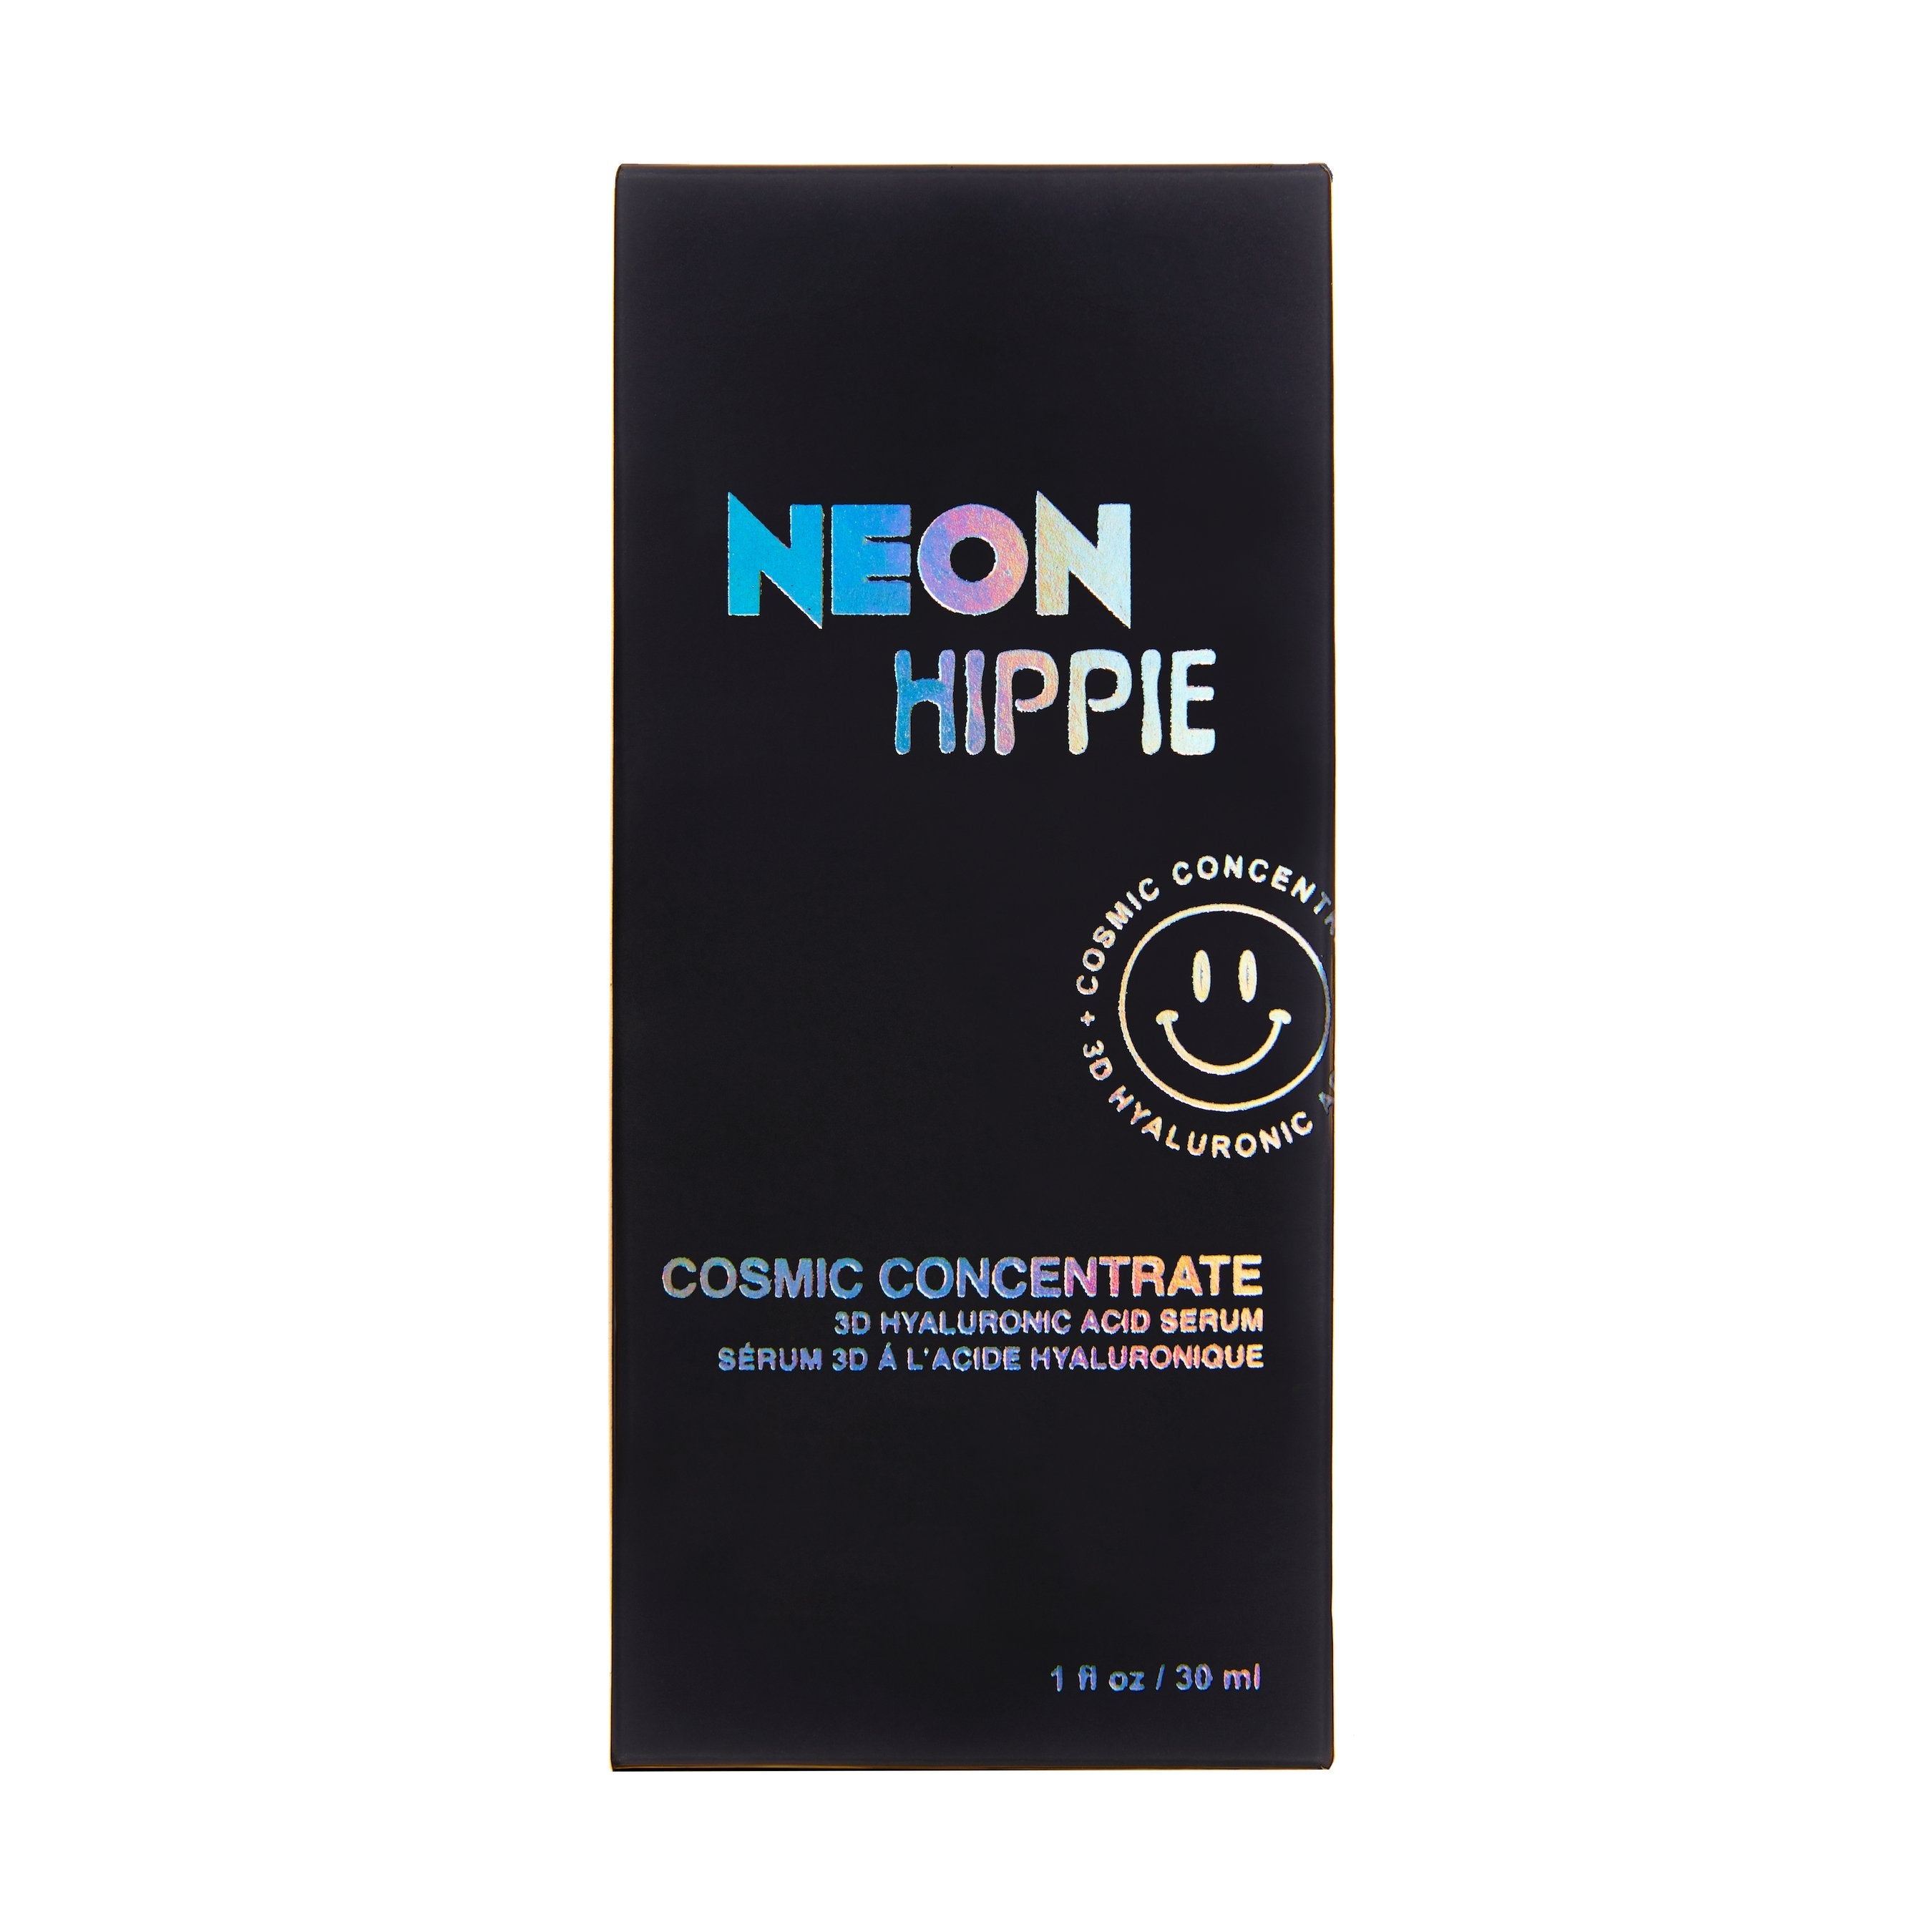 NEON HIPPIE COSMIC CONCENTRATE™ - Multiverse